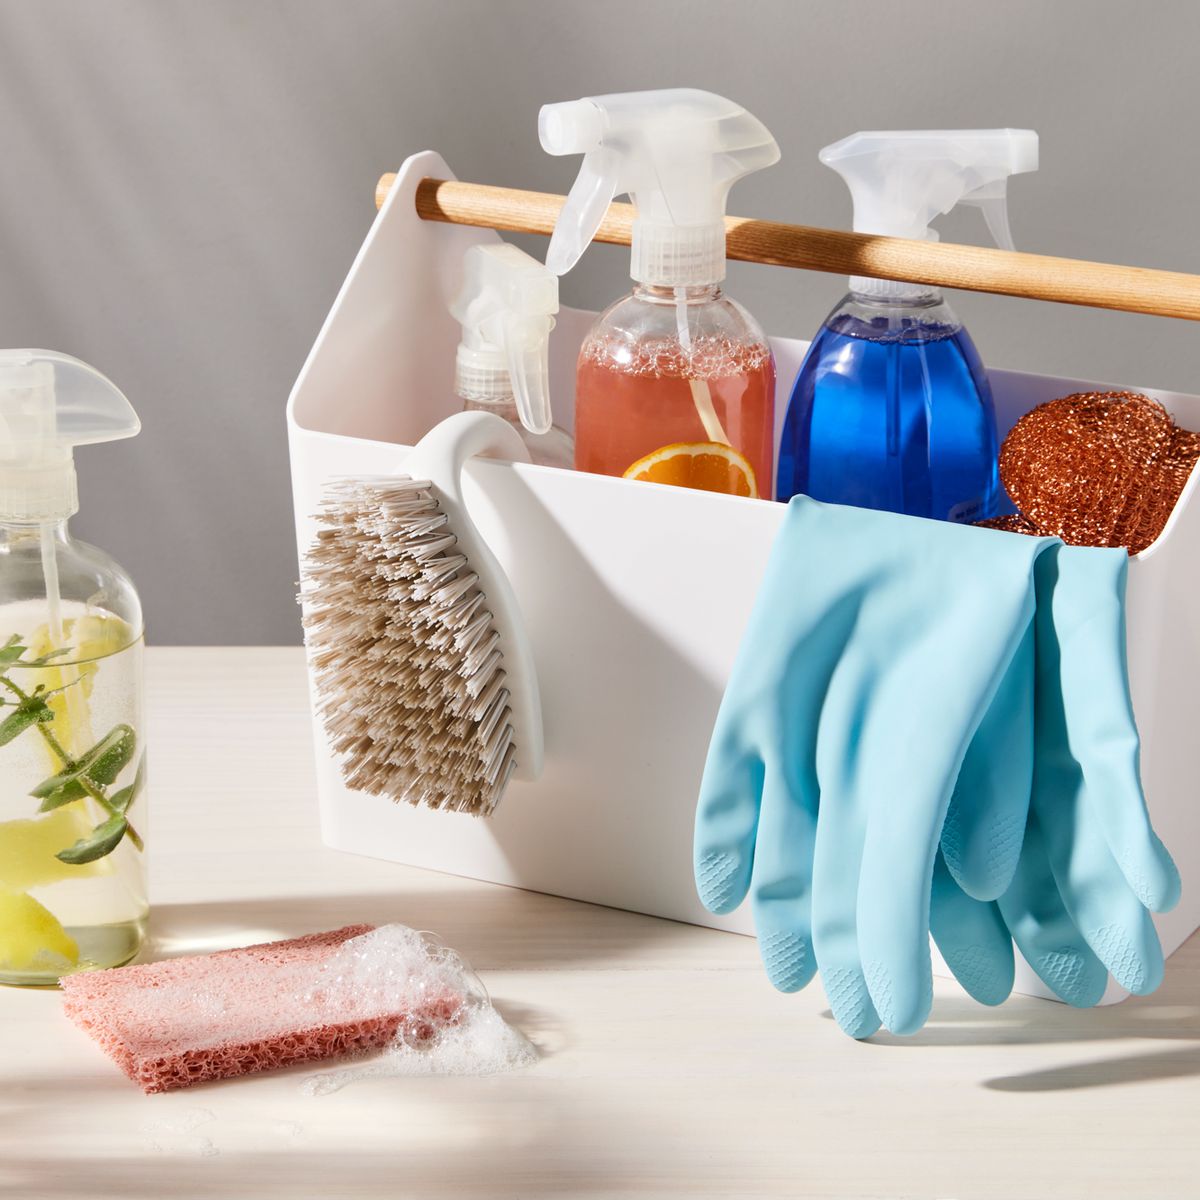 Best Cleaning Products for Housekeeping